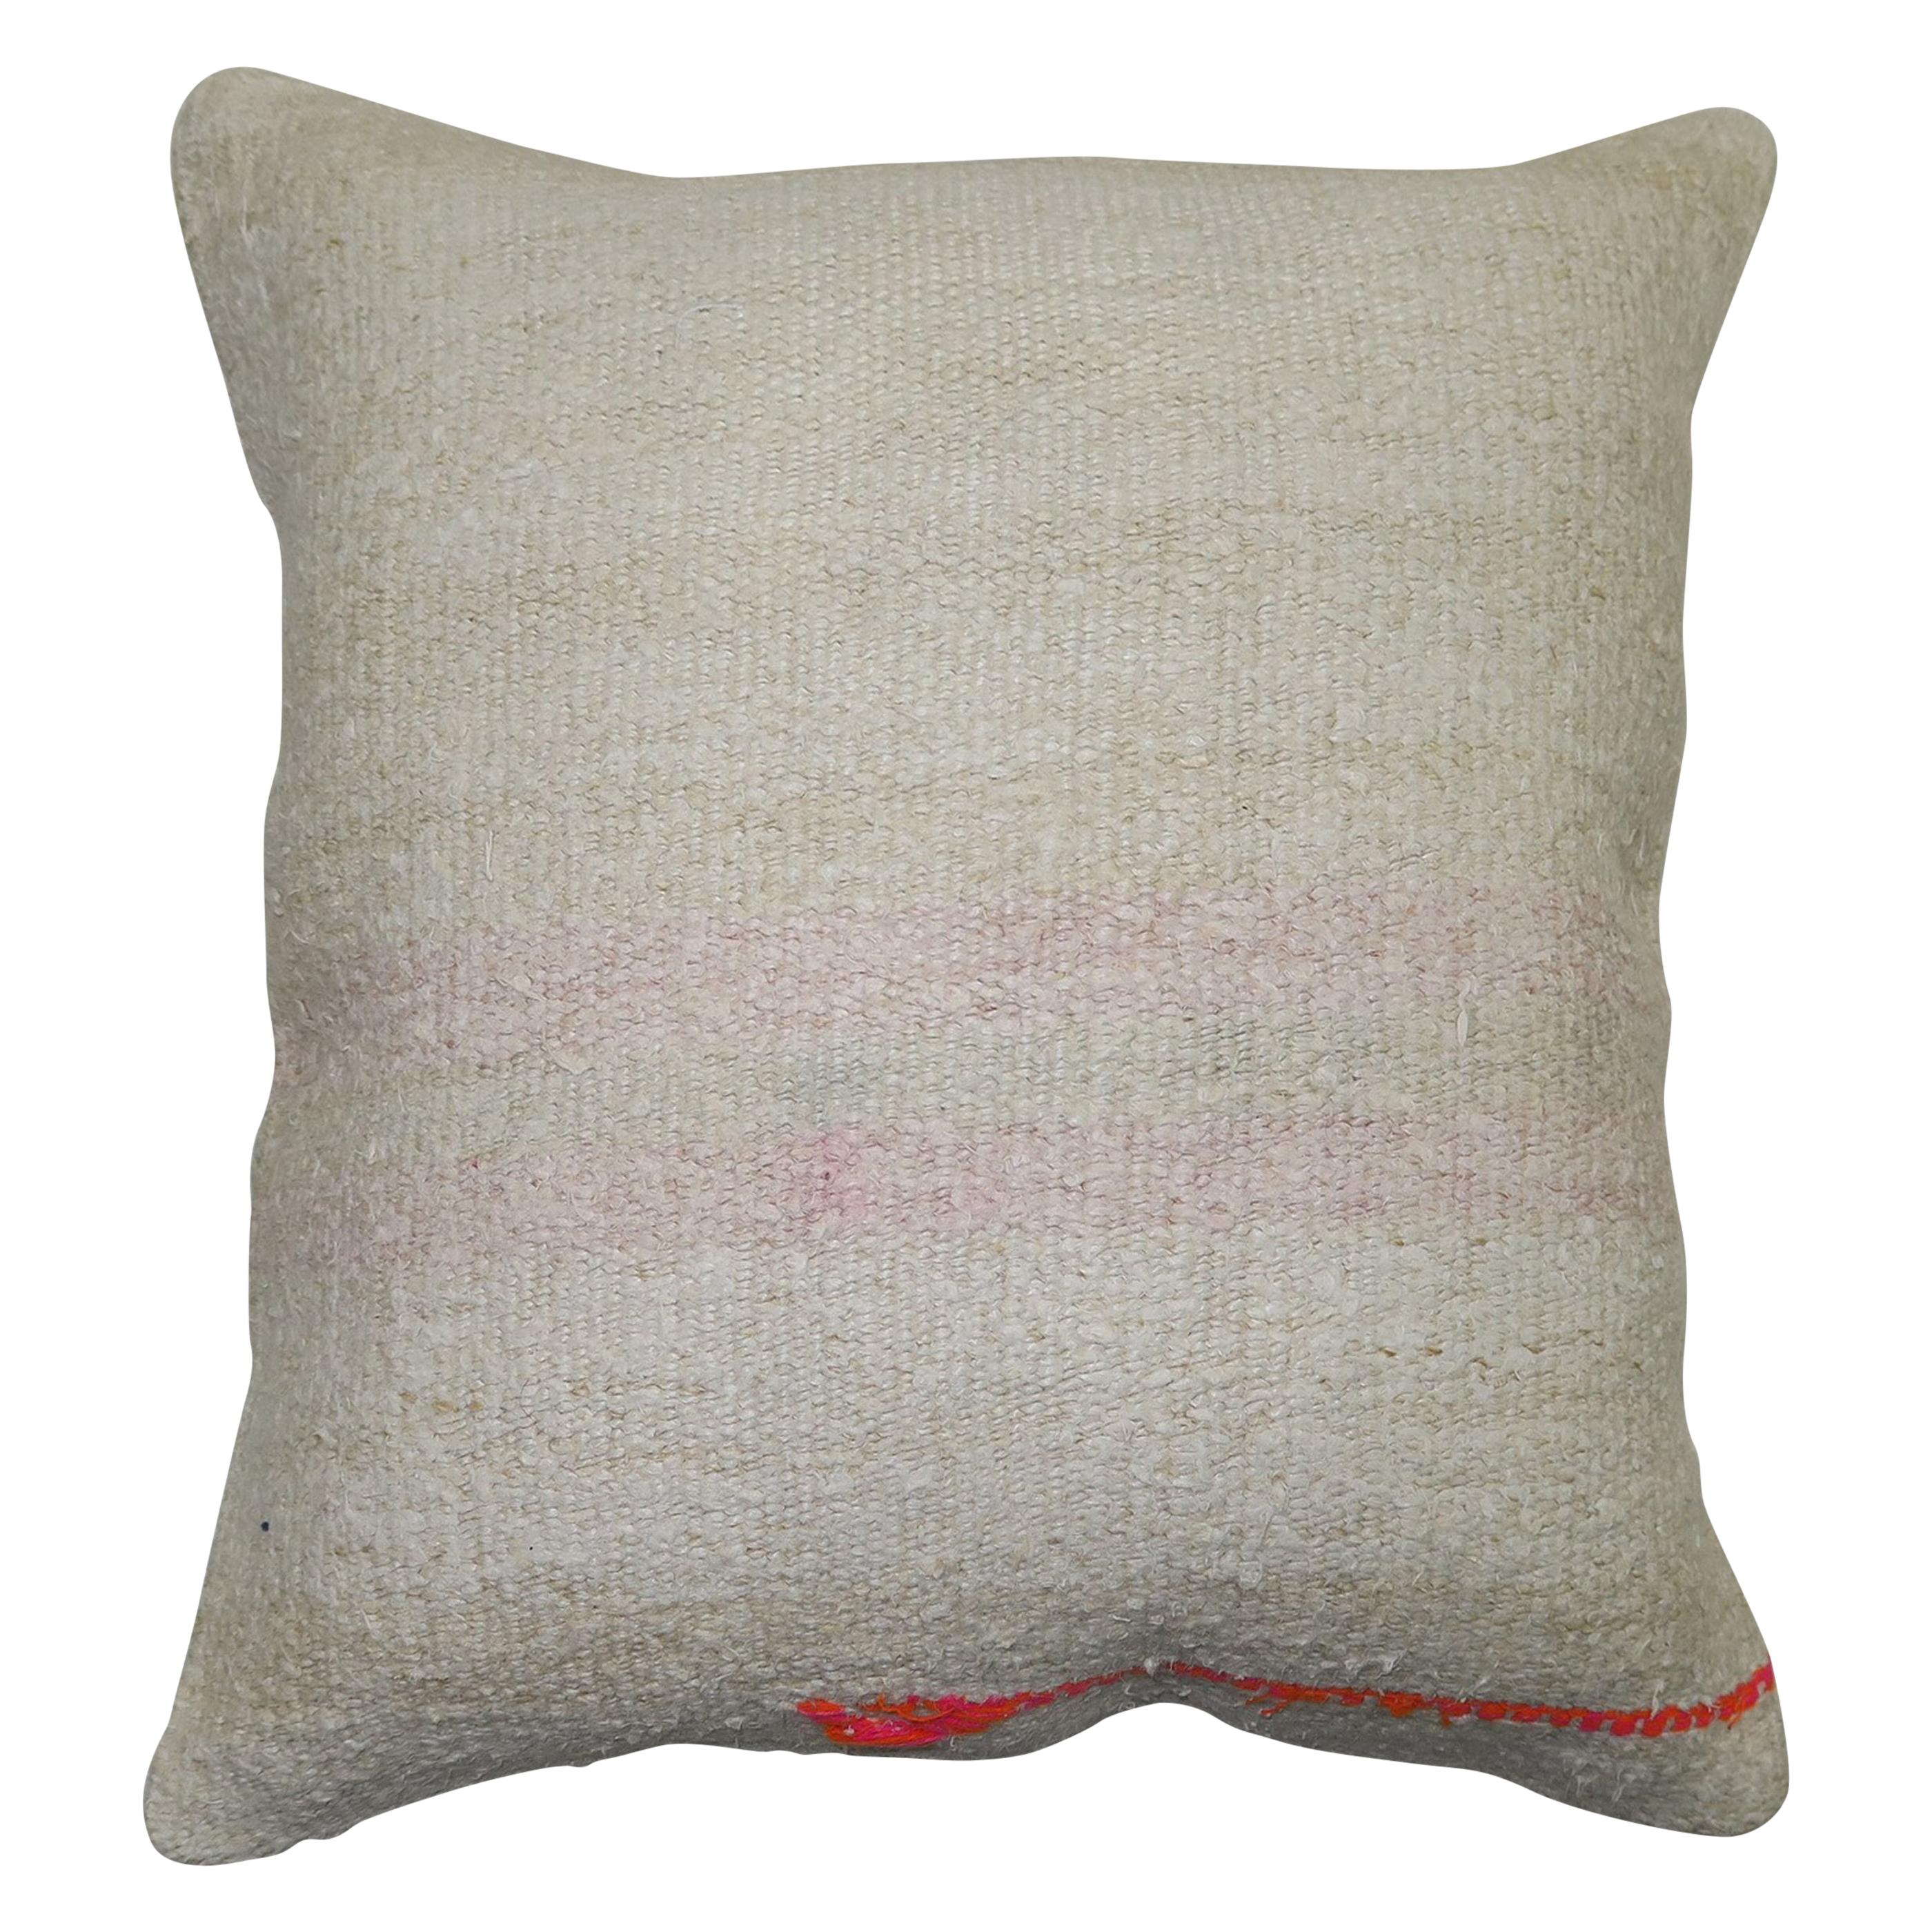 White Kilim Pillow with Bright Florescent Outline For Sale